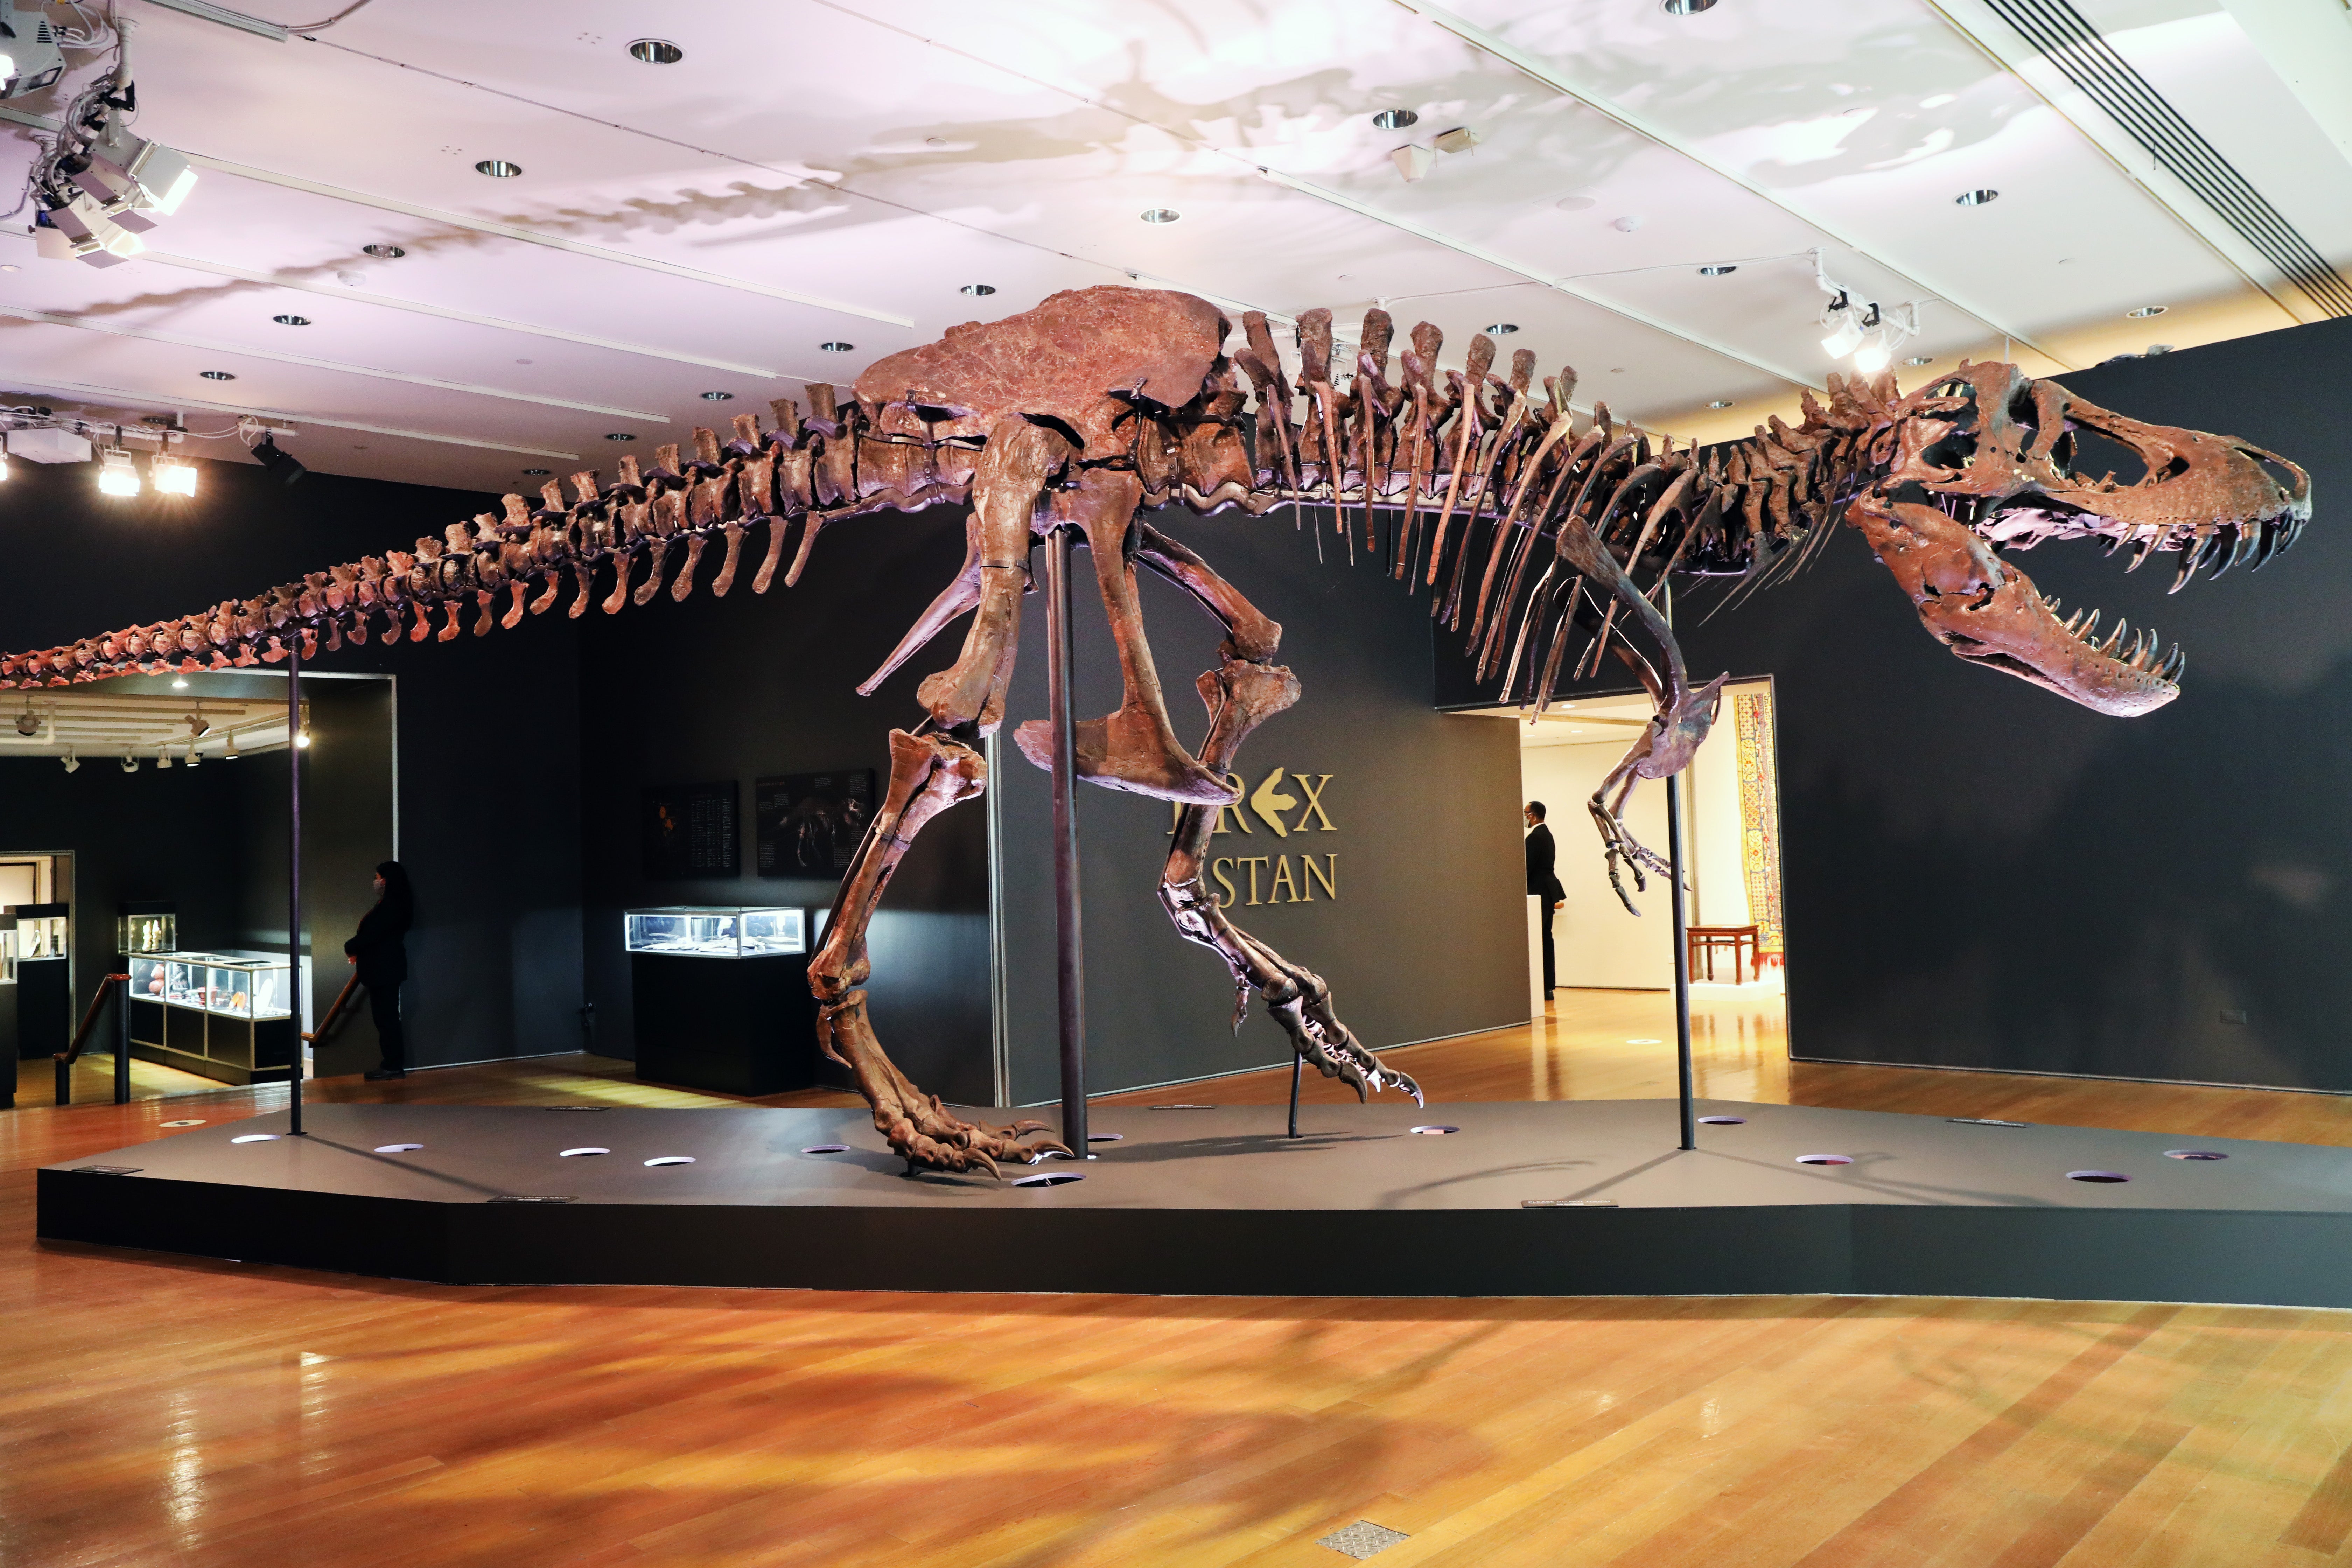 The skeleton is almost 40-feet in length